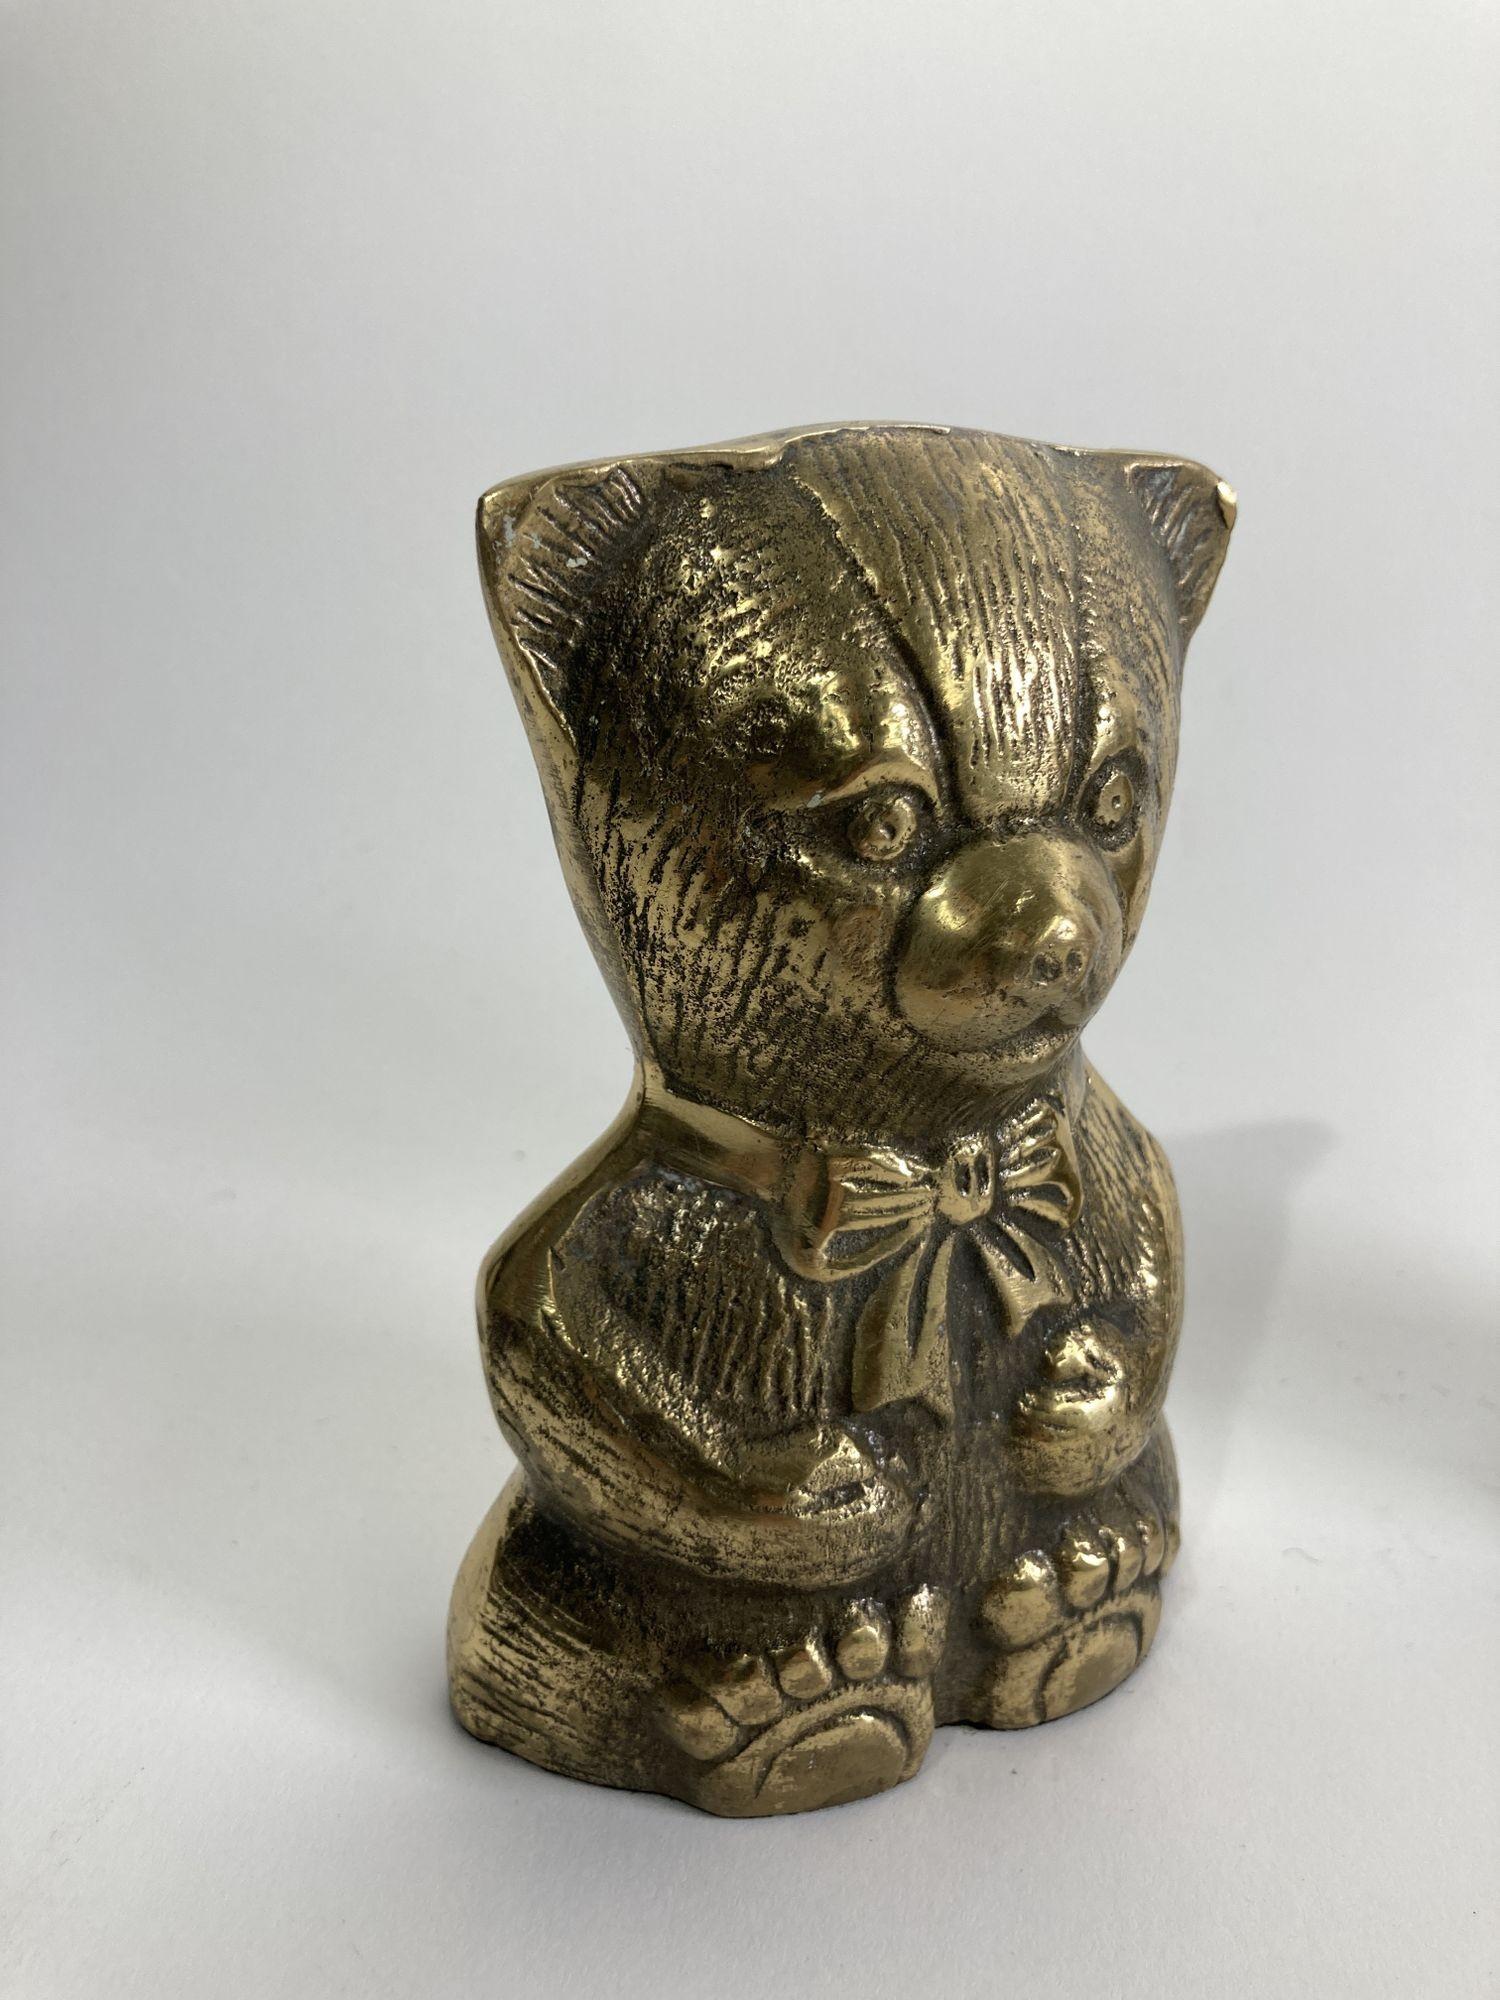 Vintage mid-century brass teddy bear bookends.
These pair of teddy bear would make a luxurious addition to any room, and especially as part of a nursery or kid's room decor.
Size each: 5''H x 3.25''W x 1.50